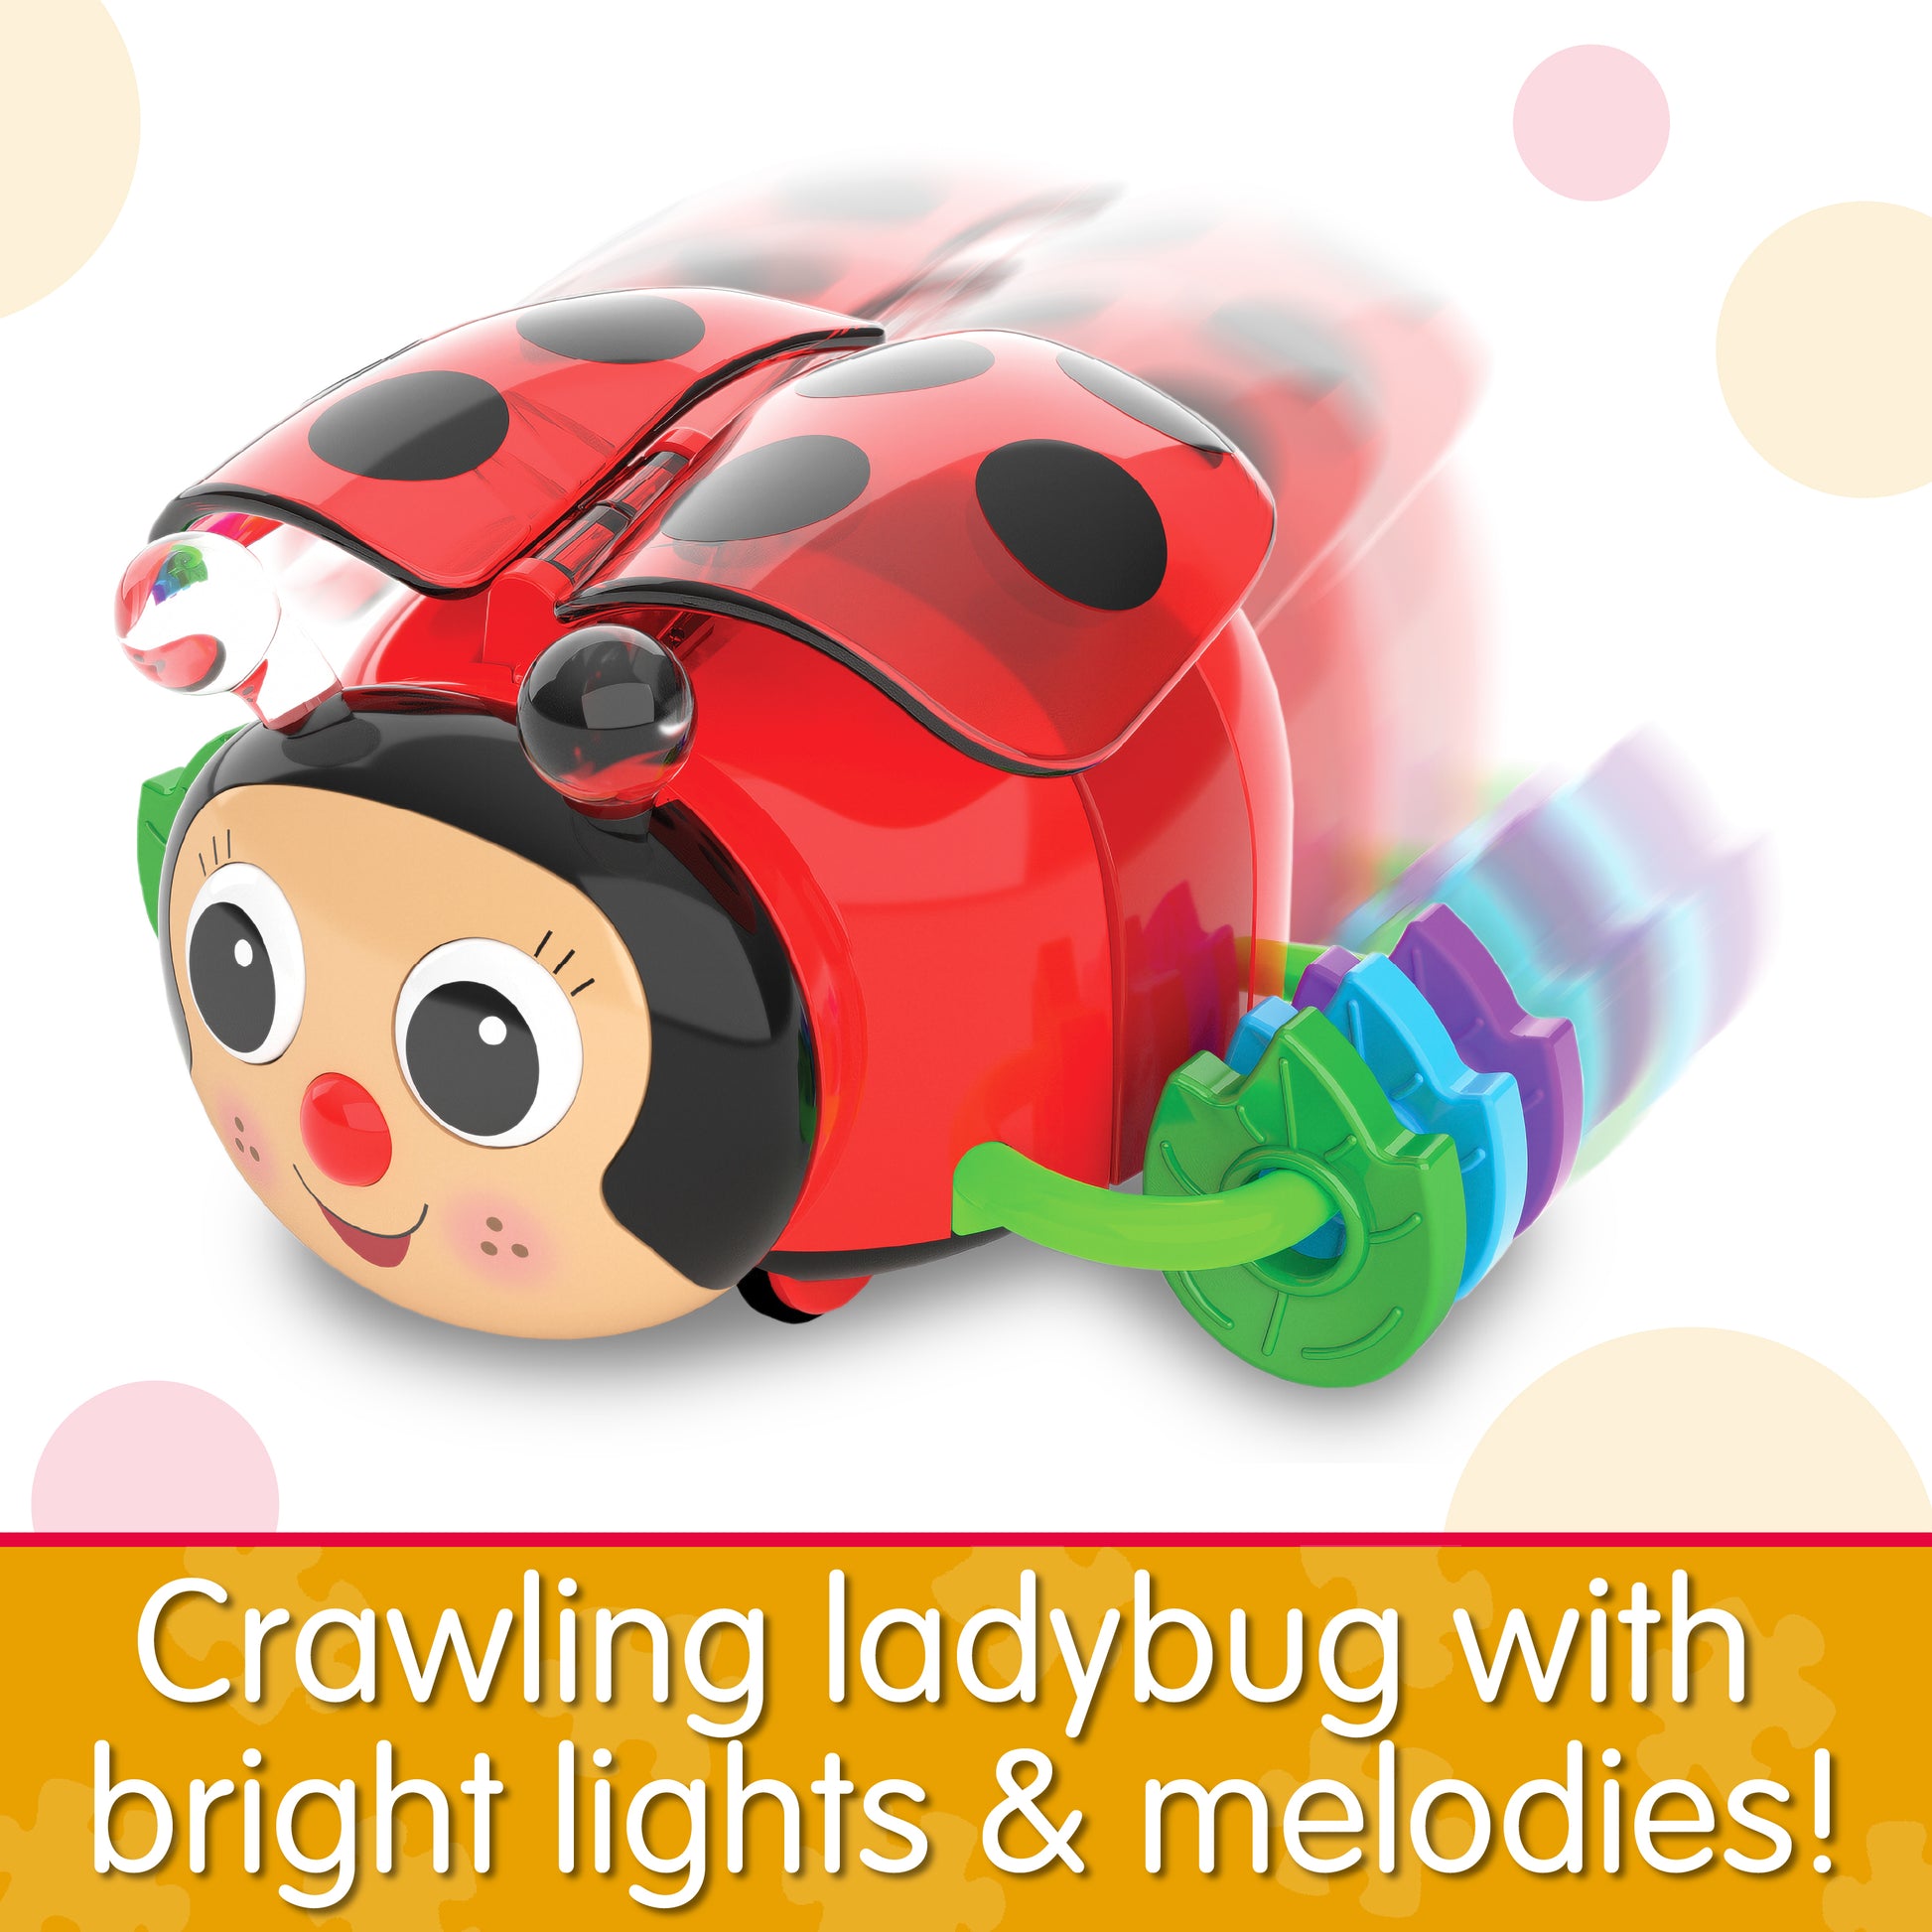 Infographic of Crawl About Ladybug that reads "Crawling ladybug with bright lights and melodies!"